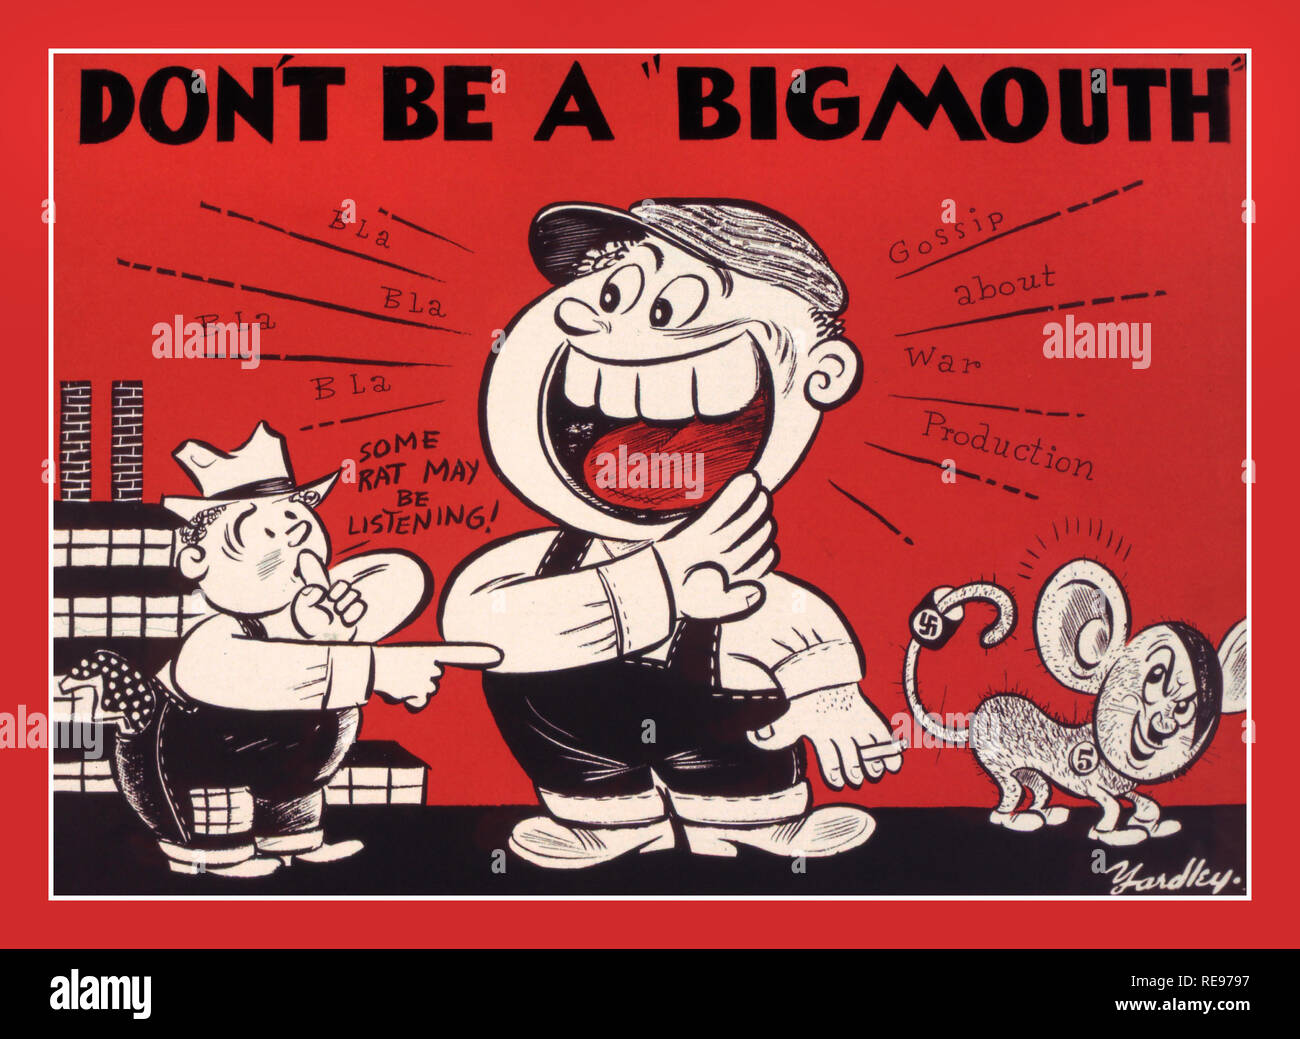 Vintage UK  WW2 Propaganda Poster Office for Emergency Management. War Production Board. ‘Don't be a bigmouth’ Adolf Hitler caricatured as a rat with big ears... circa 1942 Stock Photo